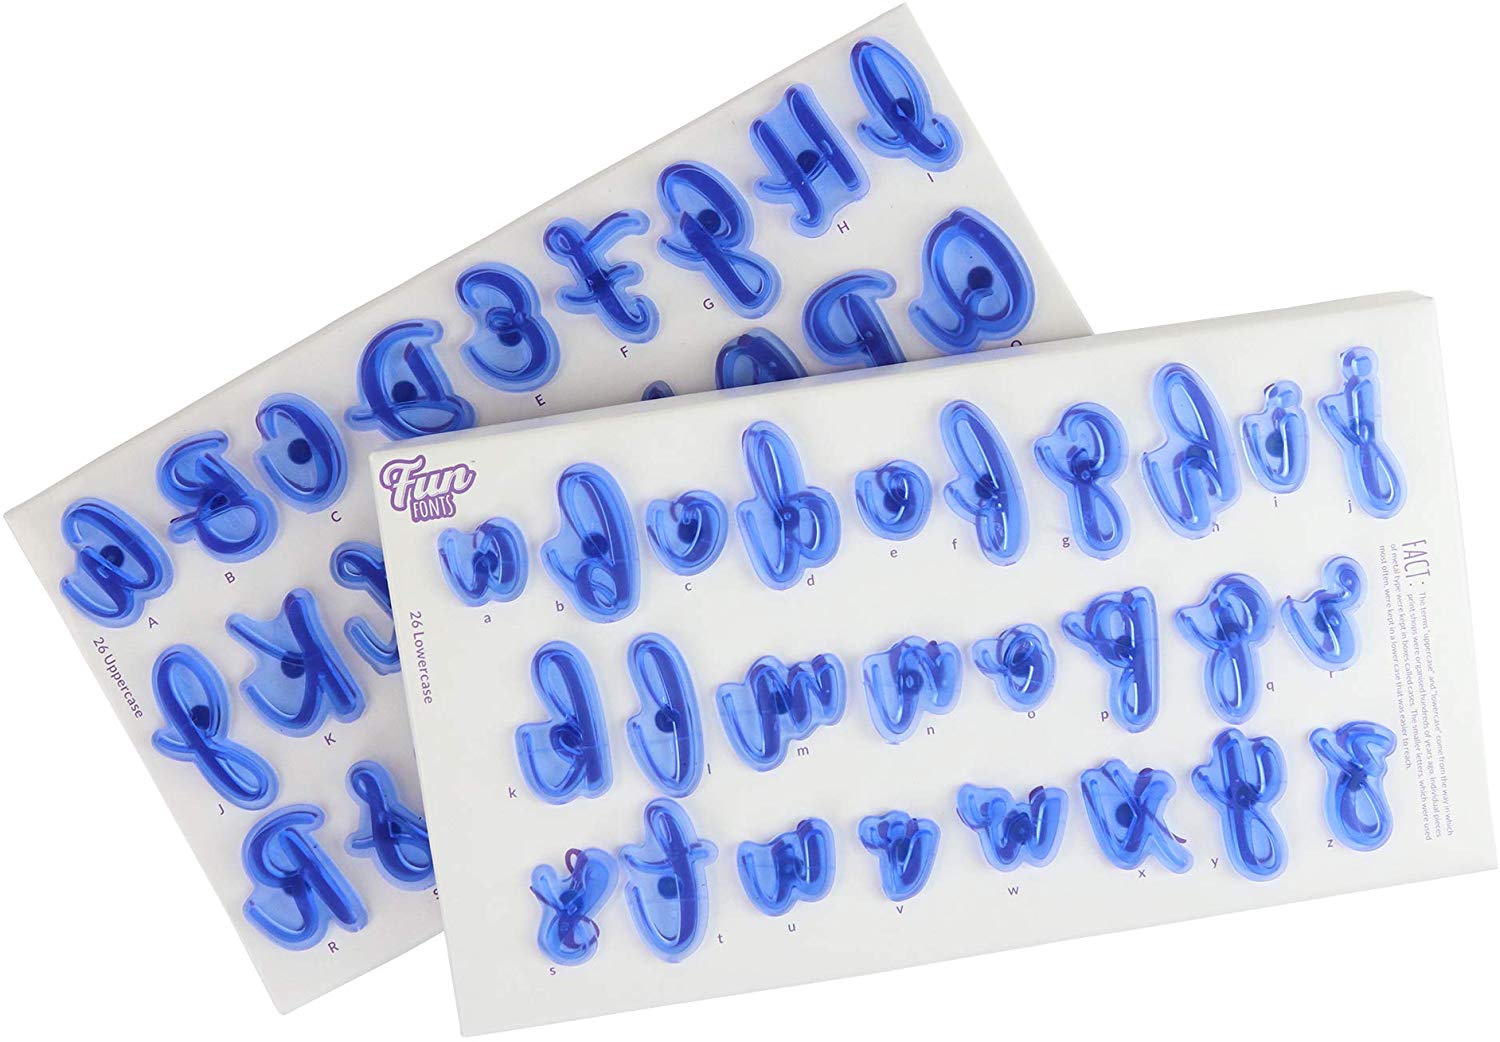 Foam Stamp Letters  Stamped lettering, Foam stamps, Letters